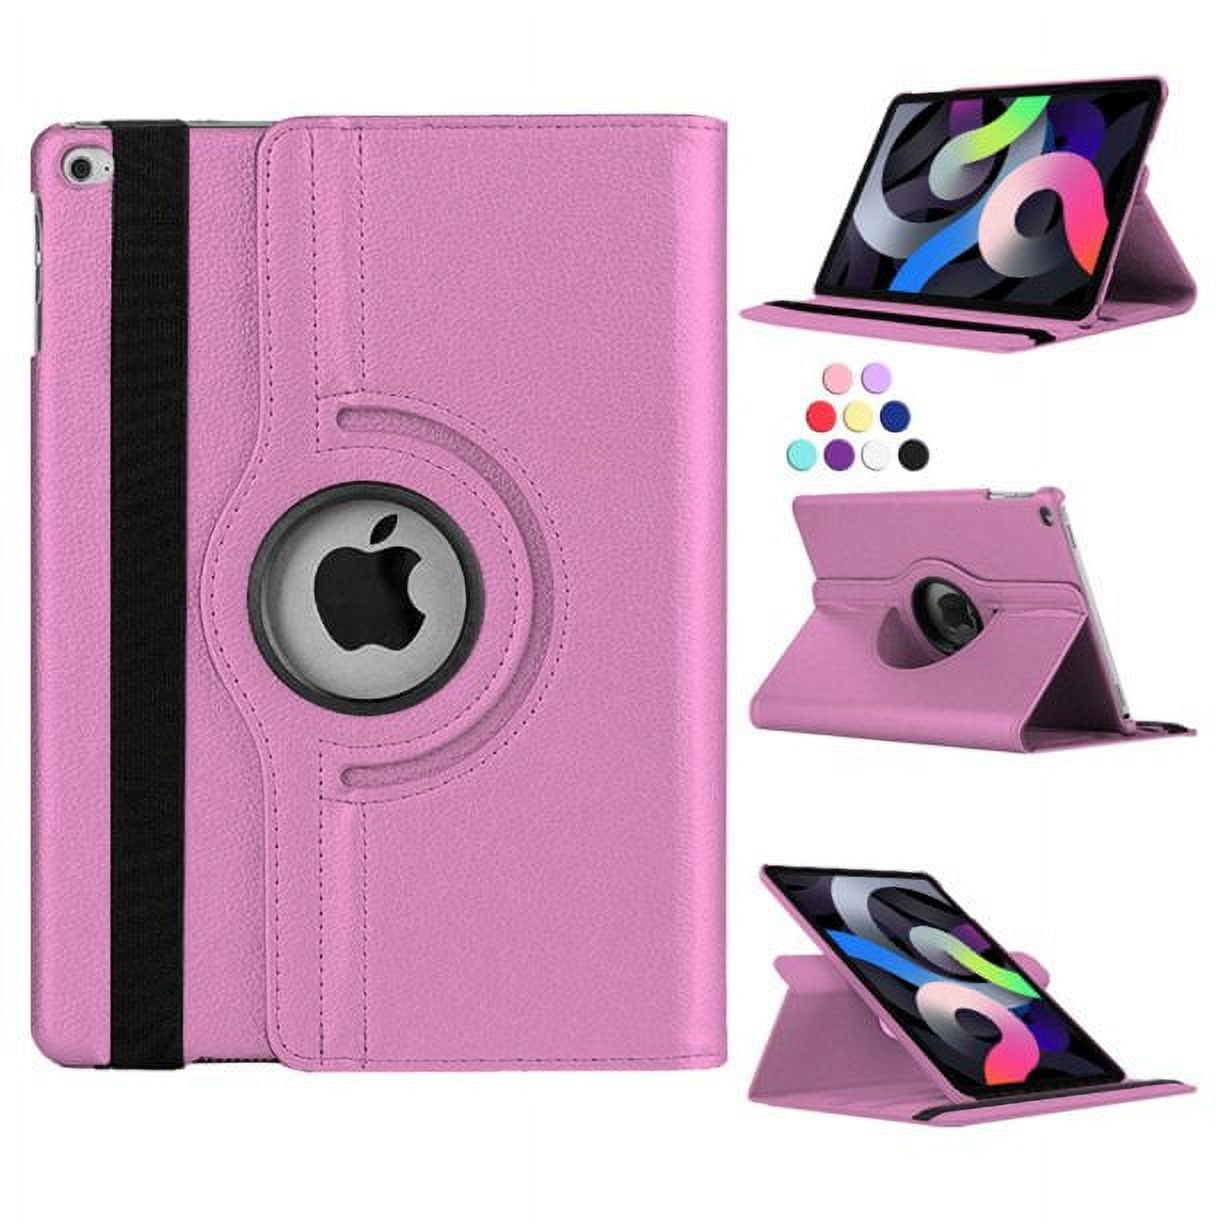  Supveco Case for iPad 10th Generation (10.9'', 2022 Released),  Dual Layer Full Body Protection Cases with Built-in Screen Protector  Drop-Proof Cover for iPad 10.9 Inch - Purple : Electronics